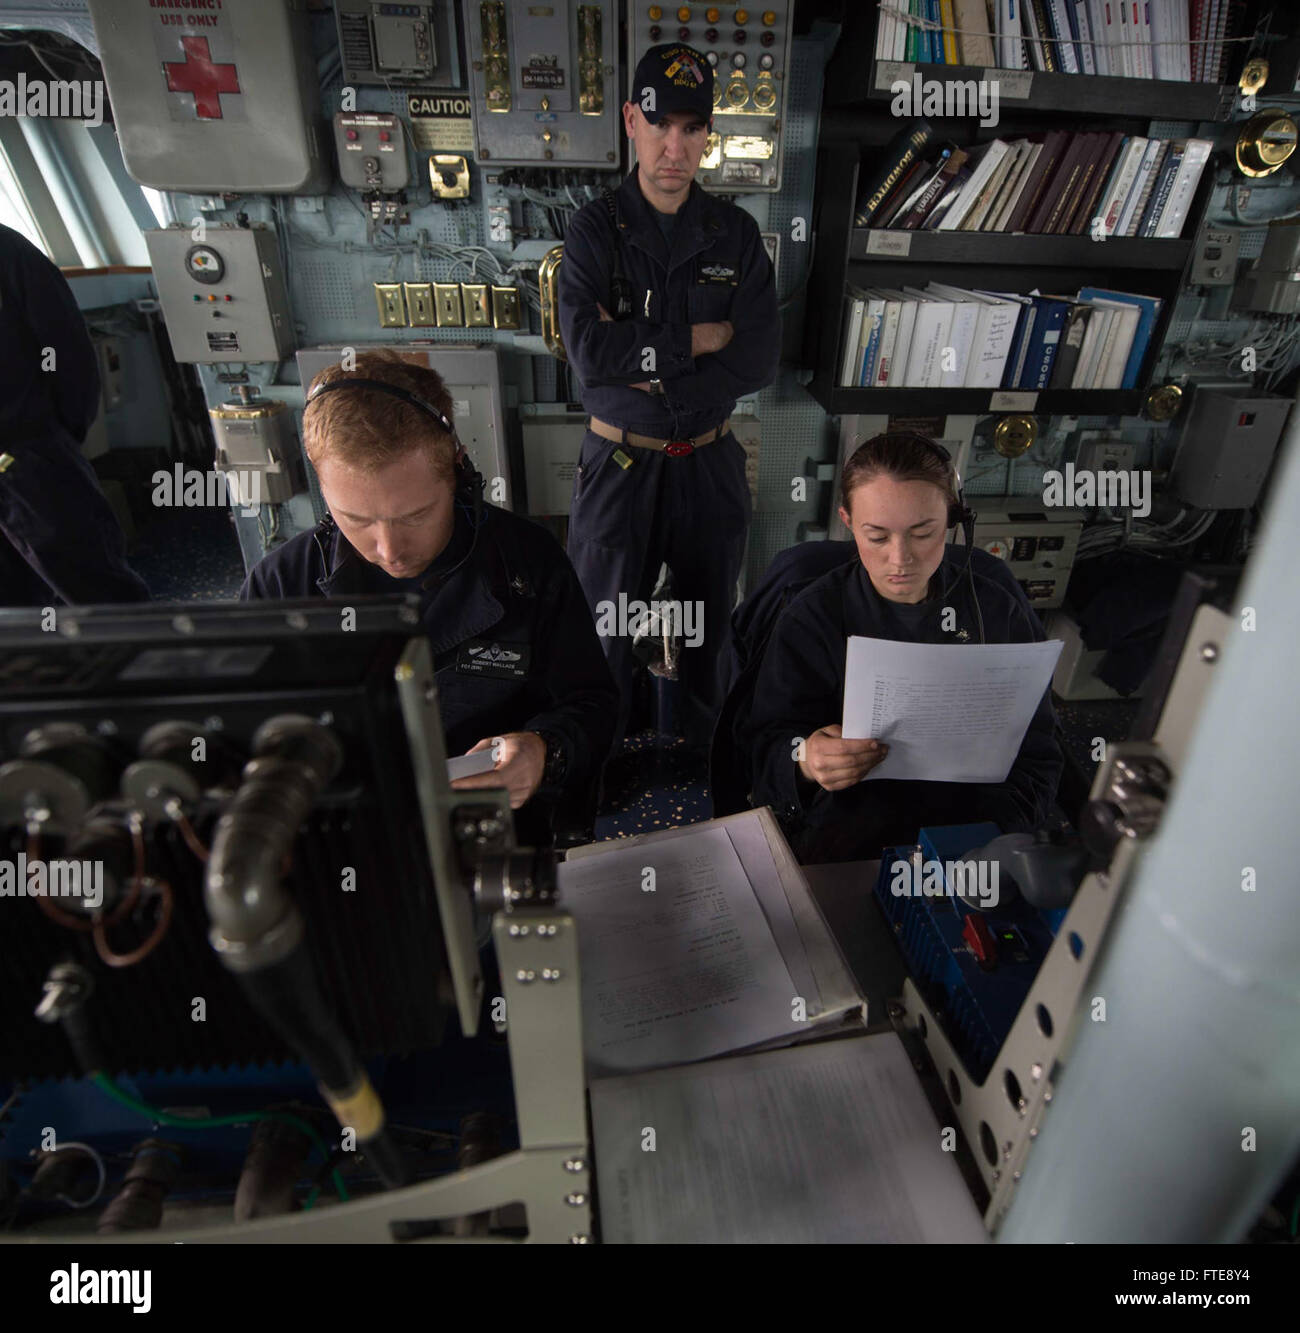 150224-N-TC720-039 MEDITERRANEAN SEA (Feb. 24, 2015) Fire Controlman 1st Class Robert Walker and Gunner's Mate 3rd Class Rachel Beglan prepare for a live-fire gunnery exercise aboard USS Cole (DDG 67) Feb. 24, 2015. Cole, an Arleigh Burke-class guided-missile destroyer, homeported in Norfolk, is conducting naval operations in the U.S. 6th Fleet area of operations in support of U.S. national security interests in Europe. (U.S. Navy photo by Mass Communication Specialist 3rd Class Mat Murch/Released) Stock Photo